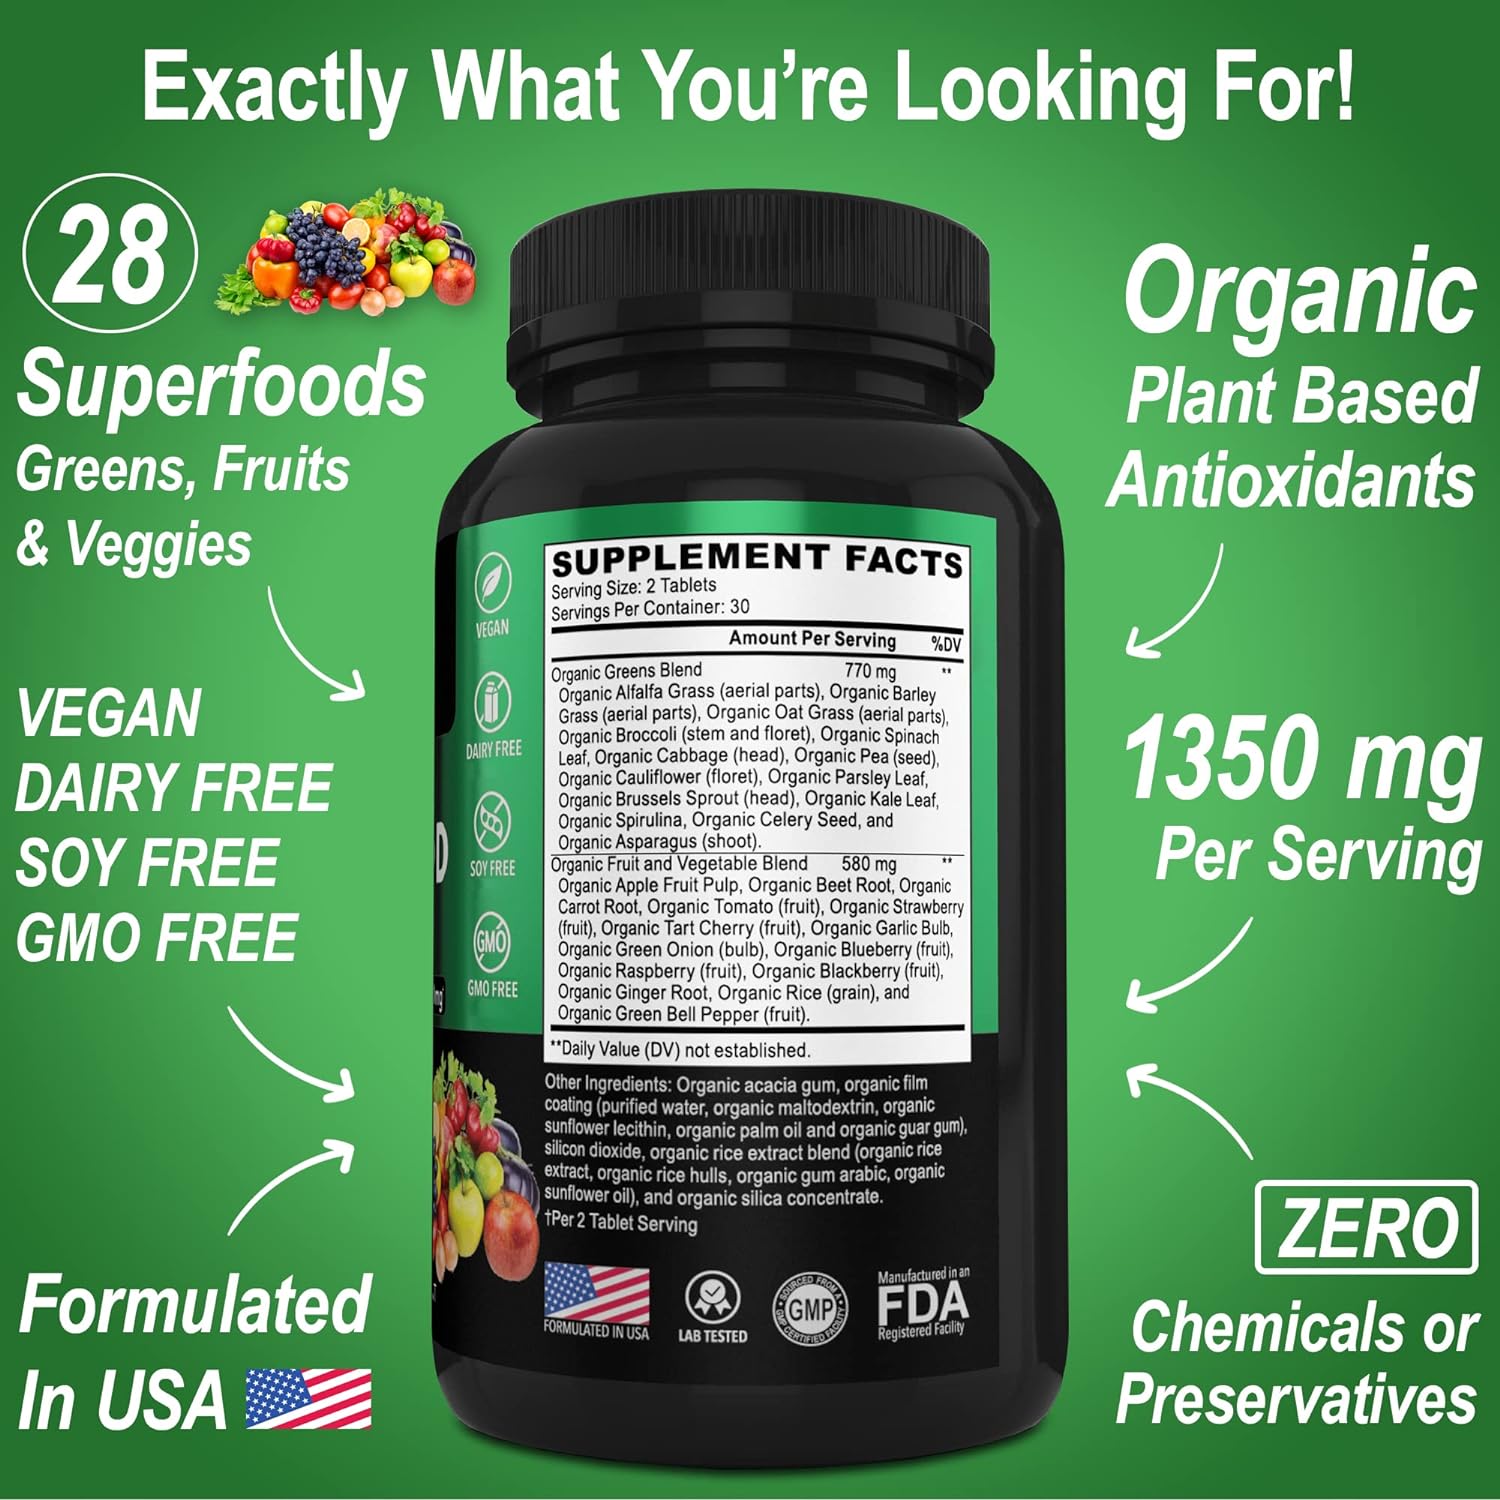 Organic Superfood Greens Fruit Supplements - Energy Super Food Fruits and Veggies Supplement Tablets - Daily Green Veggie Powder Blend Plus Vegetable Foods Alfalfa, Spinach, Cabbage Spirulina Tabs